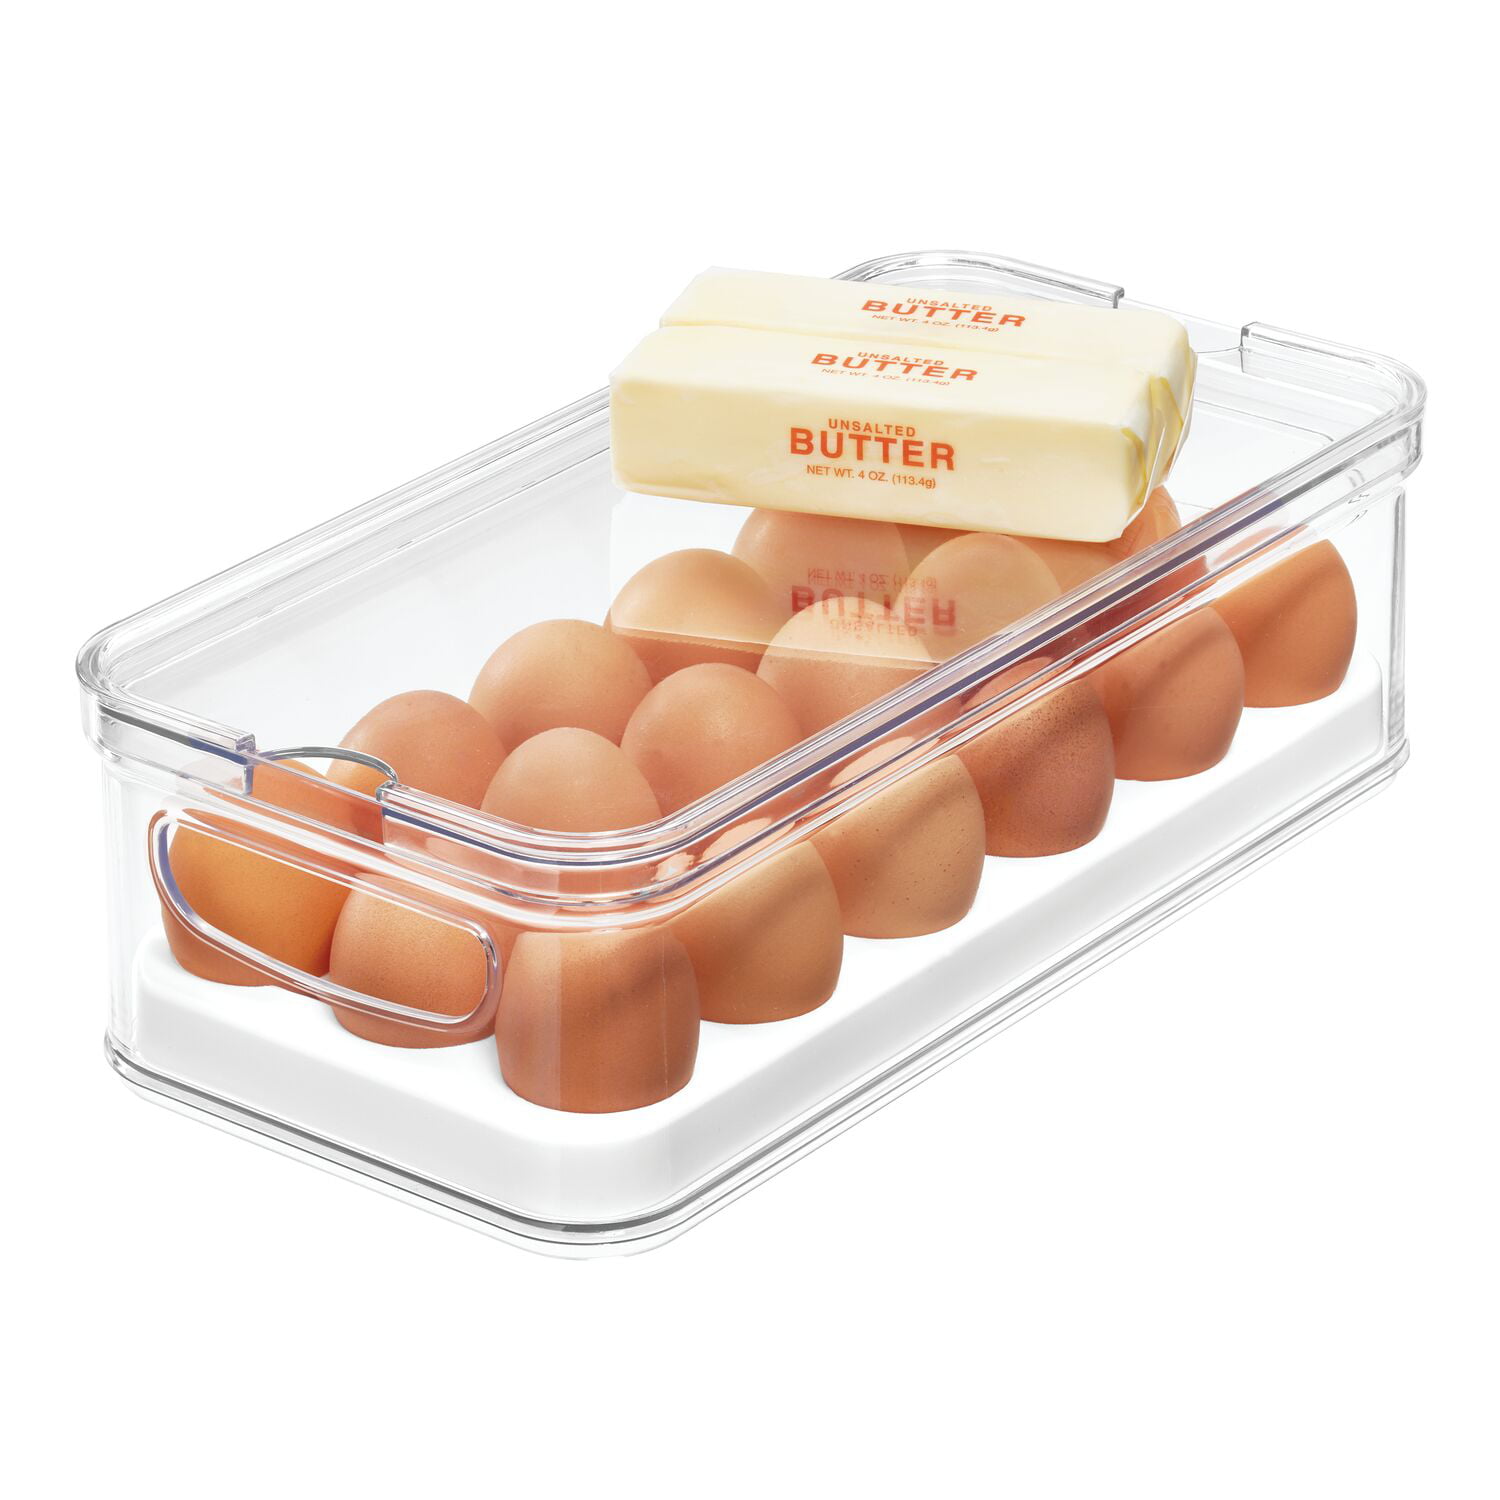 Egg Trays - Mauser Packaging Solutions